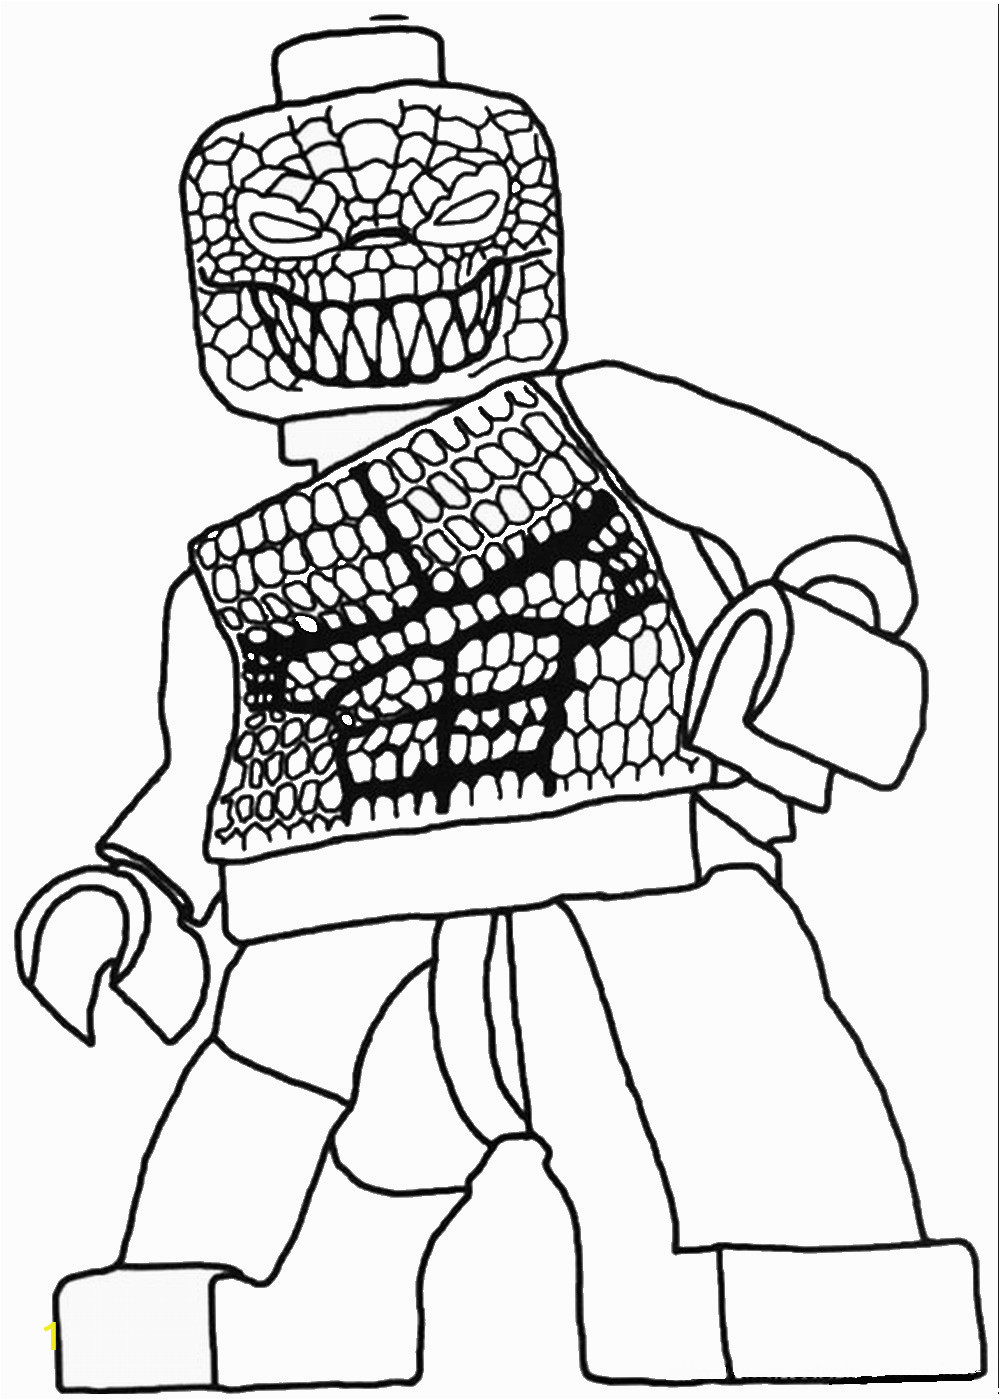 Free Printable Lego Batman Coloring Pages the Lego Batman Movie Coloring Pages